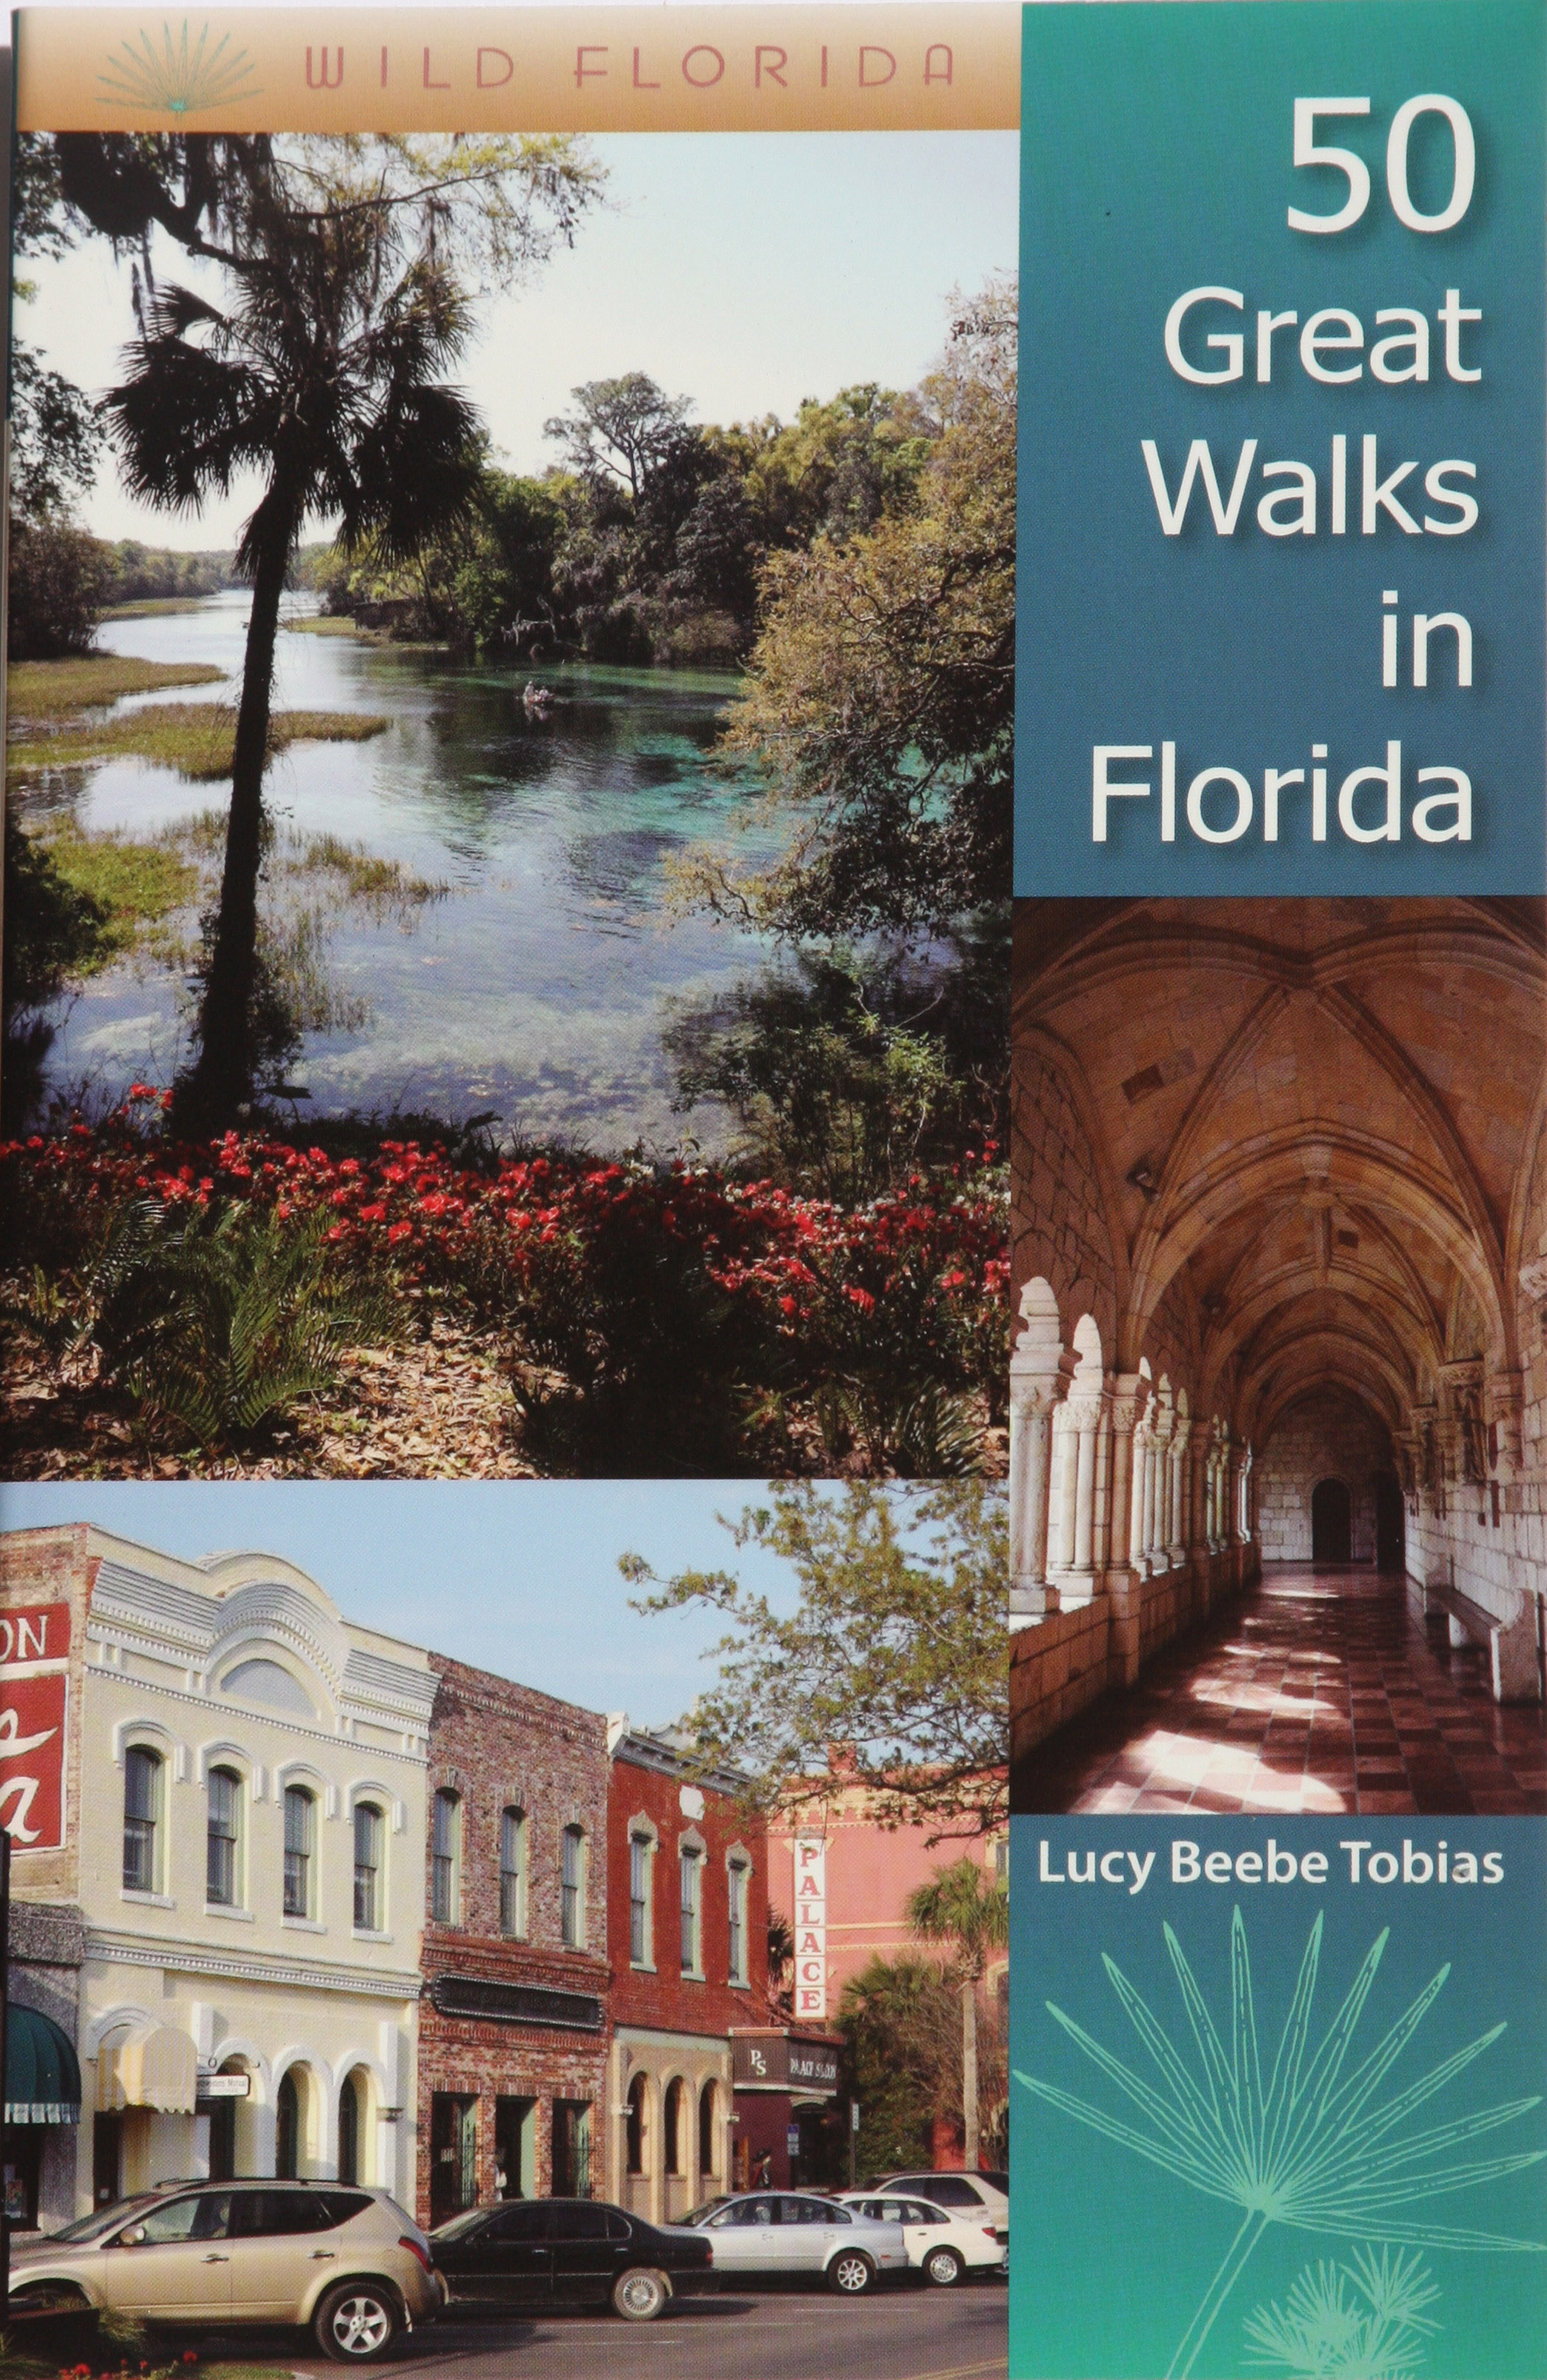 50 Great Walks in Florida is now an e book!